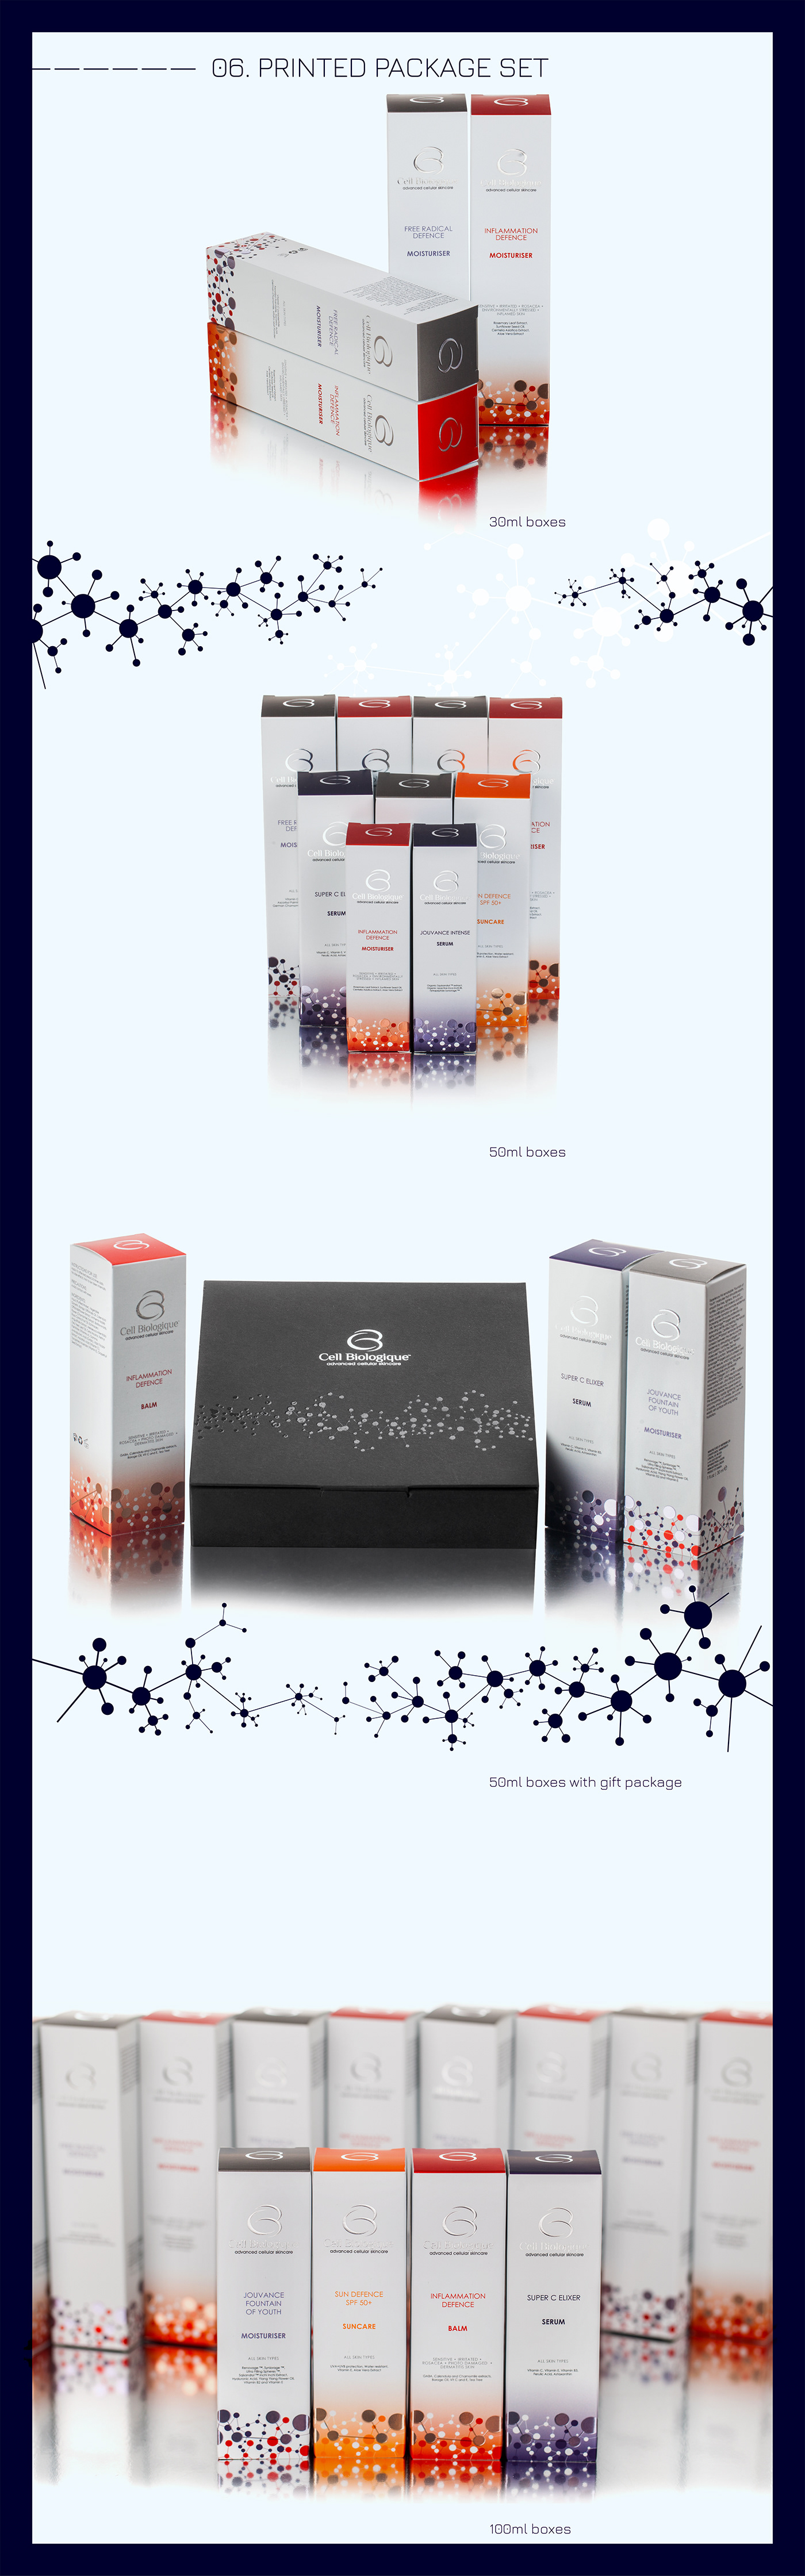 cosmetics package design  botique face cosmetic body cosmetics